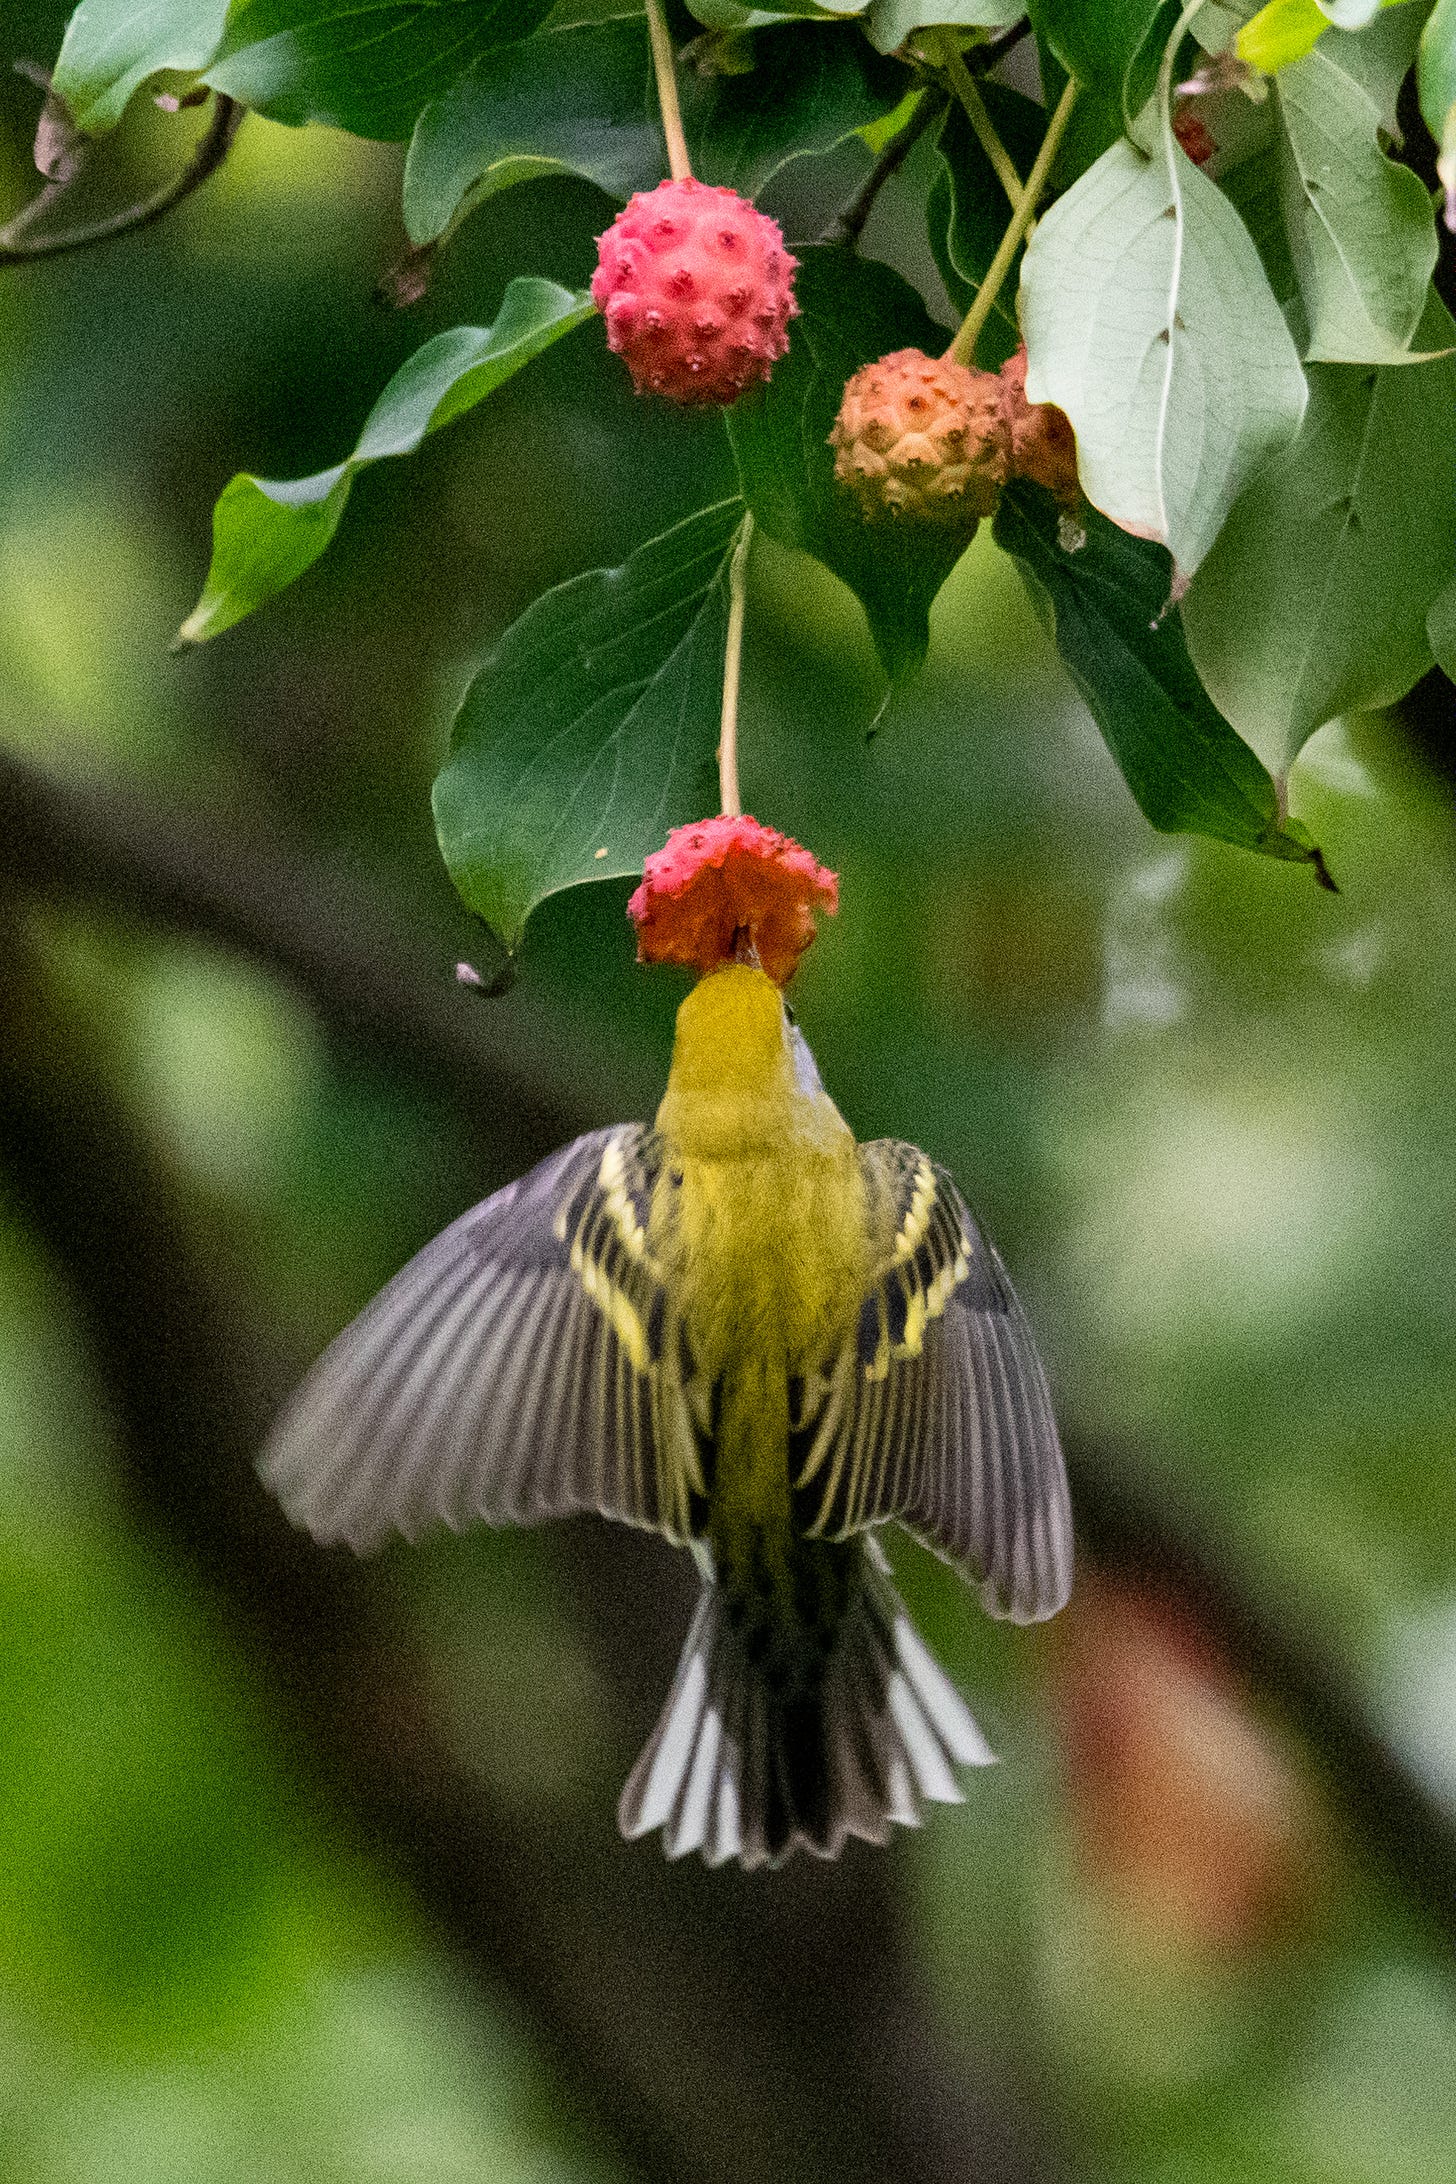 A small bird with lime-green cap and back, its wings and tail spread, flutters beneath the partially devoured pink fruit of a kousa dogwood